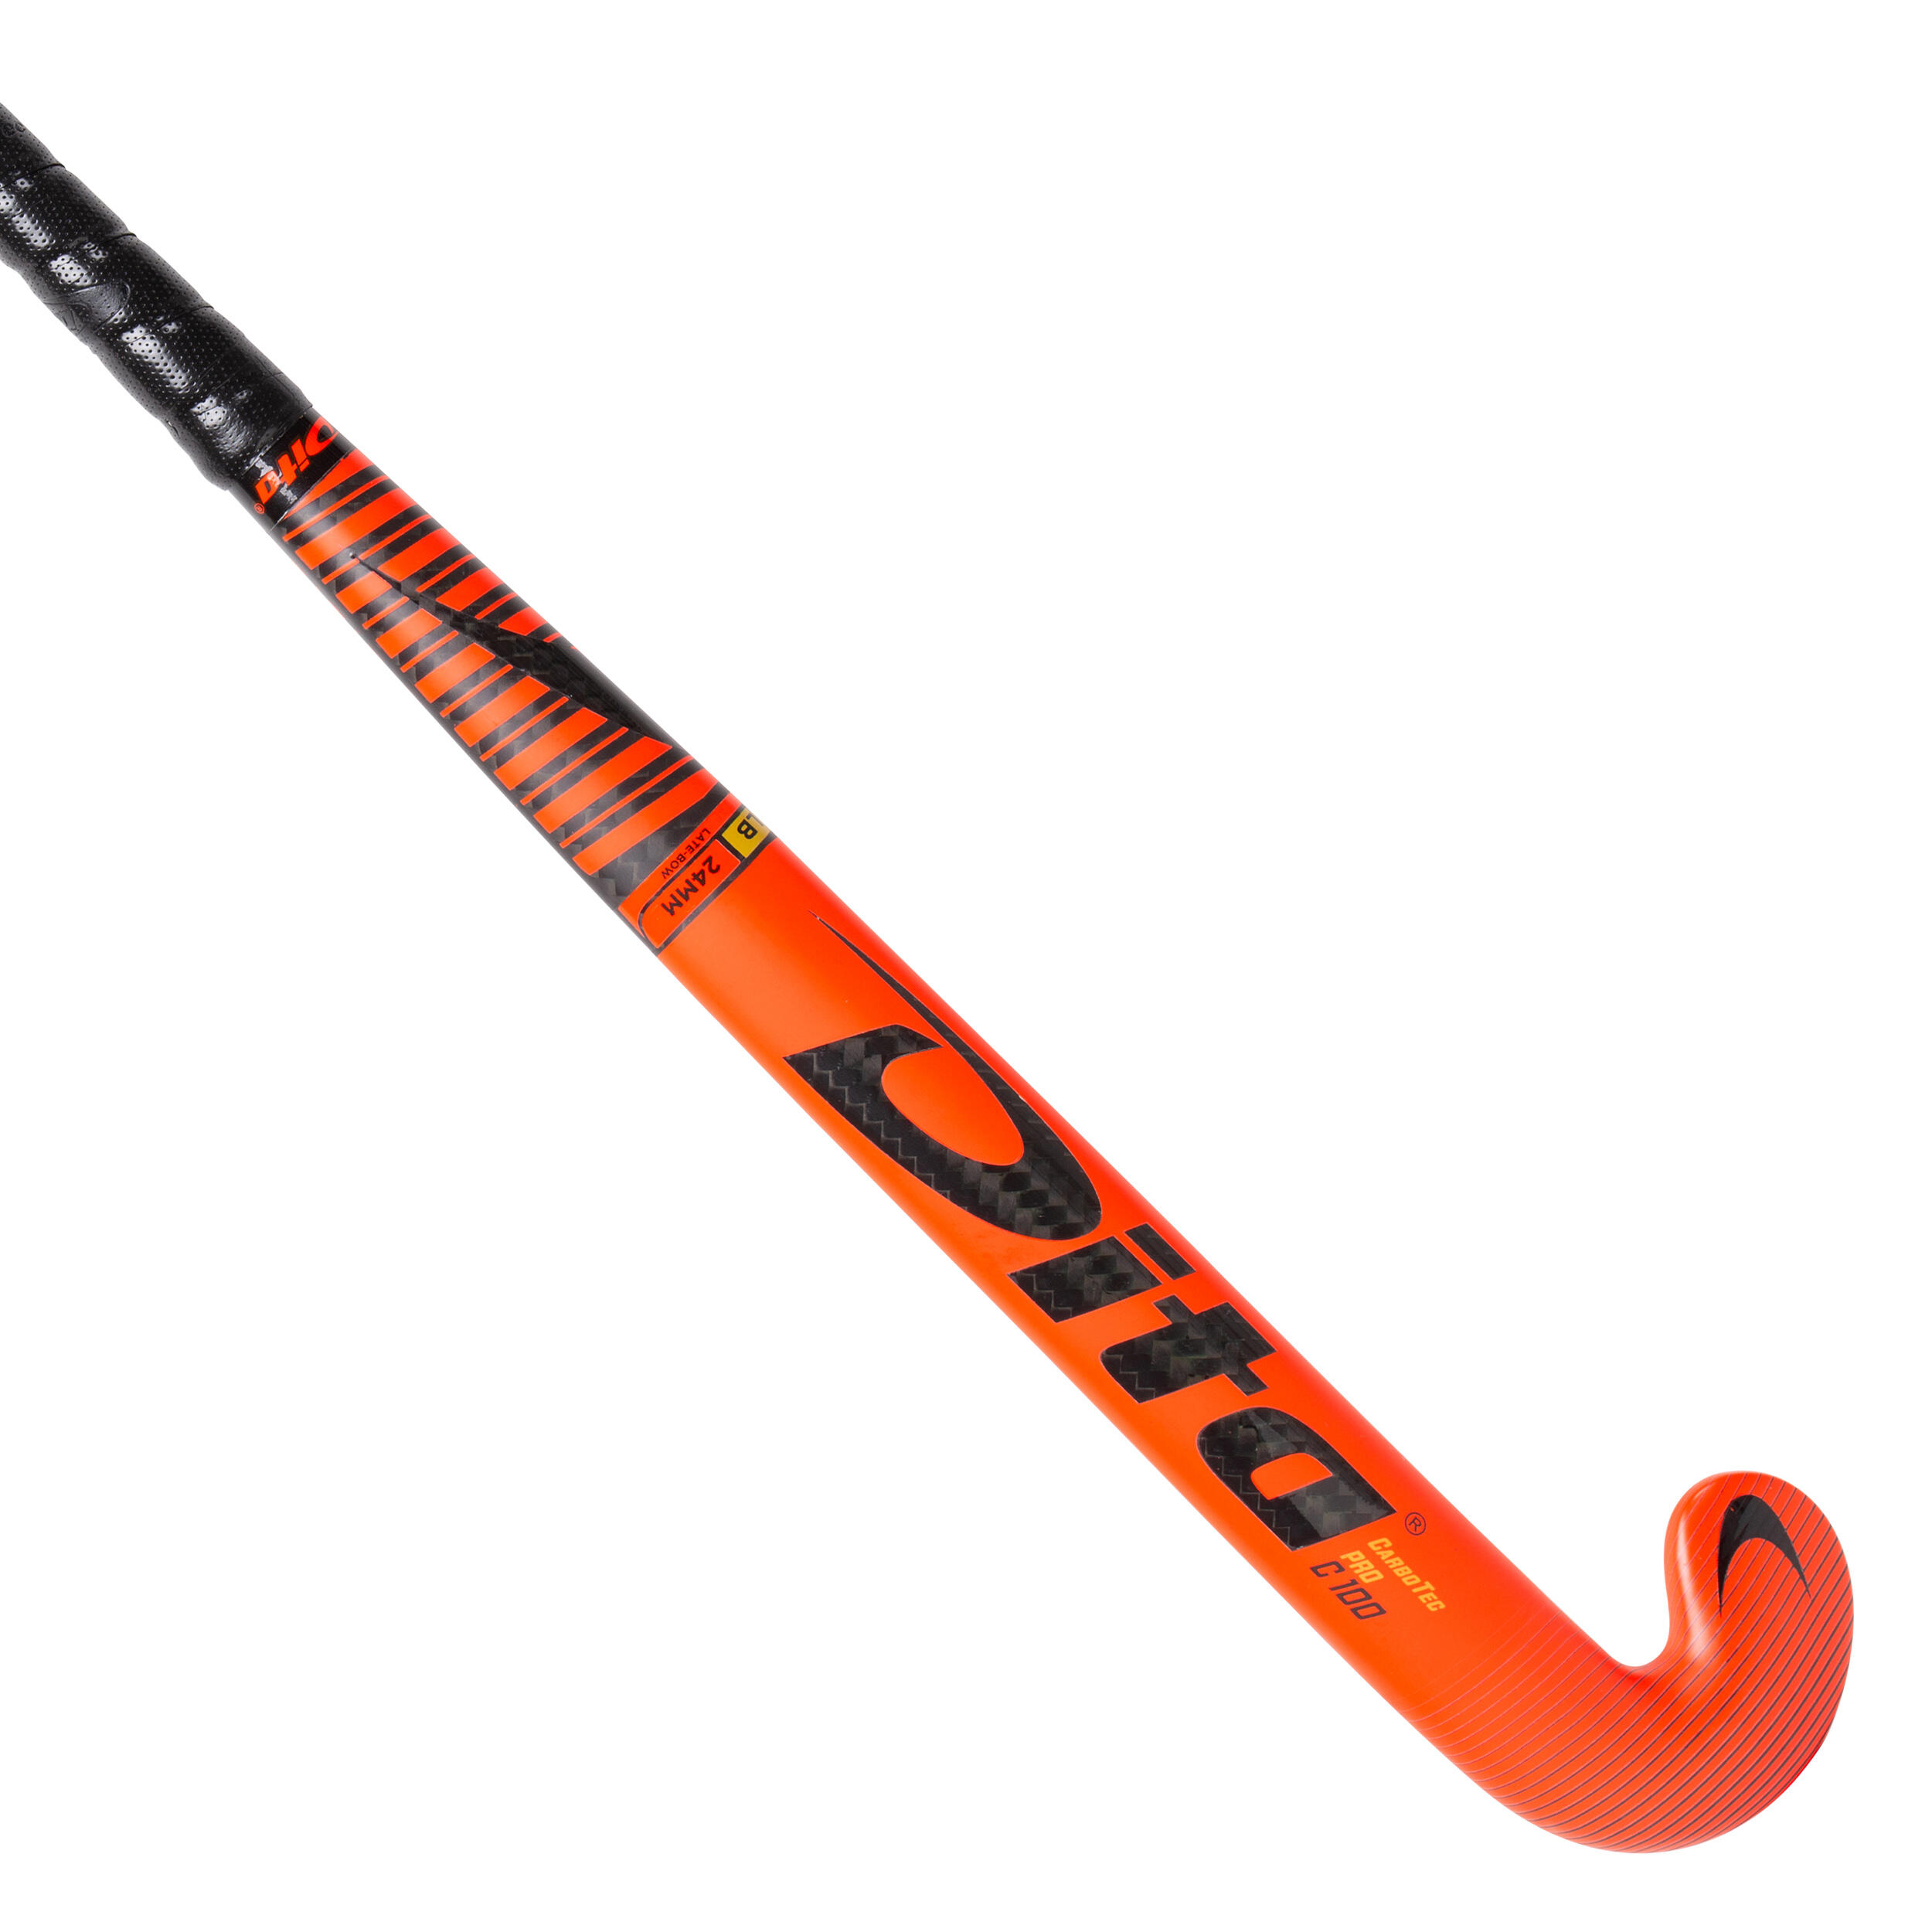 DITA Adult Advanced 100% Carbon Low Bow Field Hockey Stick CarbotecPro C100 - Red